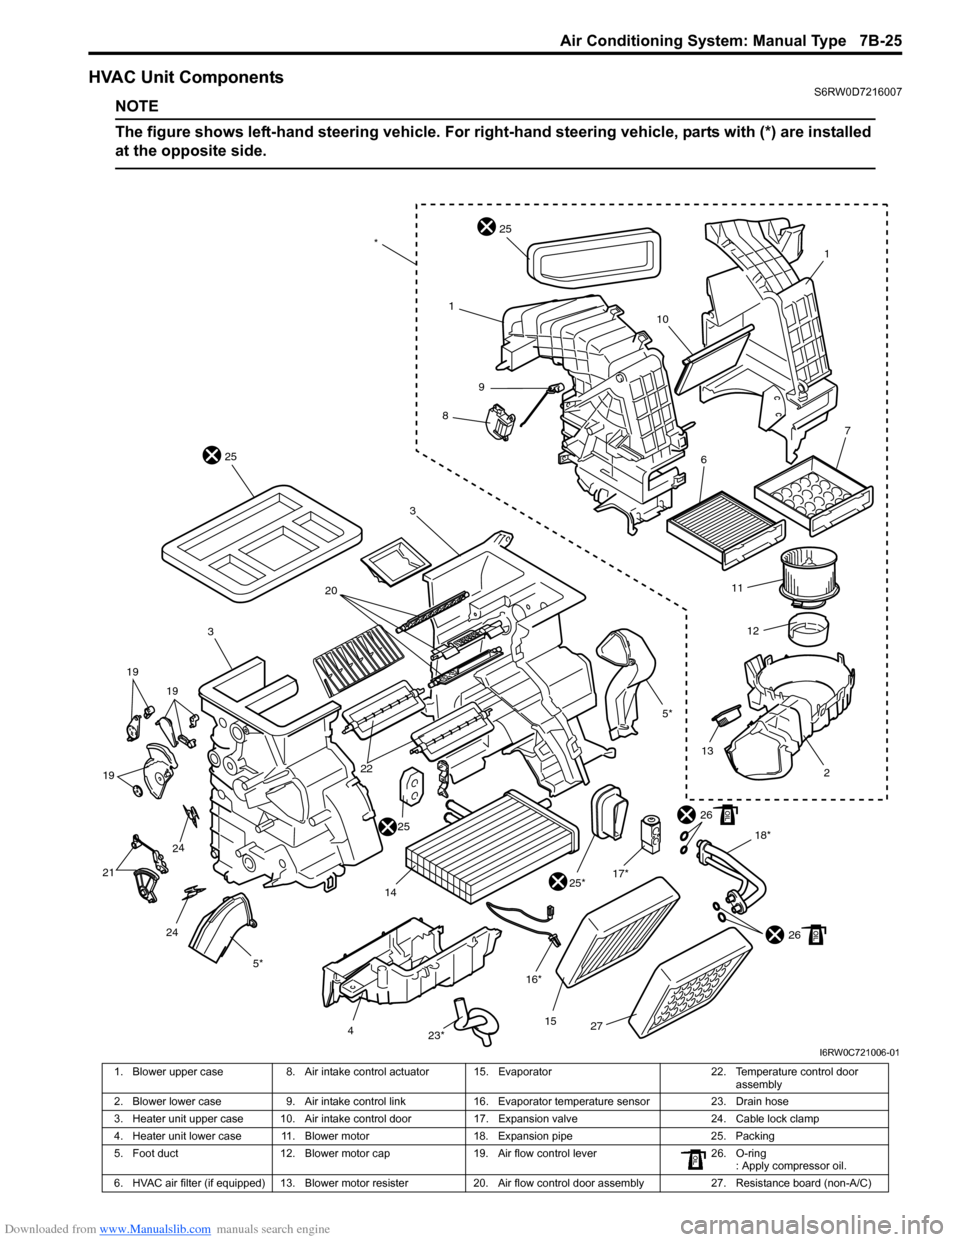 SUZUKI SX4 2006 1.G Service Workshop Manual Downloaded from www.Manualslib.com manuals search engine Air Conditioning System: Manual Type 7B-25
HVAC Unit ComponentsS6RW0D7216007
NOTE
The figure shows left-hand steering vehicle. For right-hand s